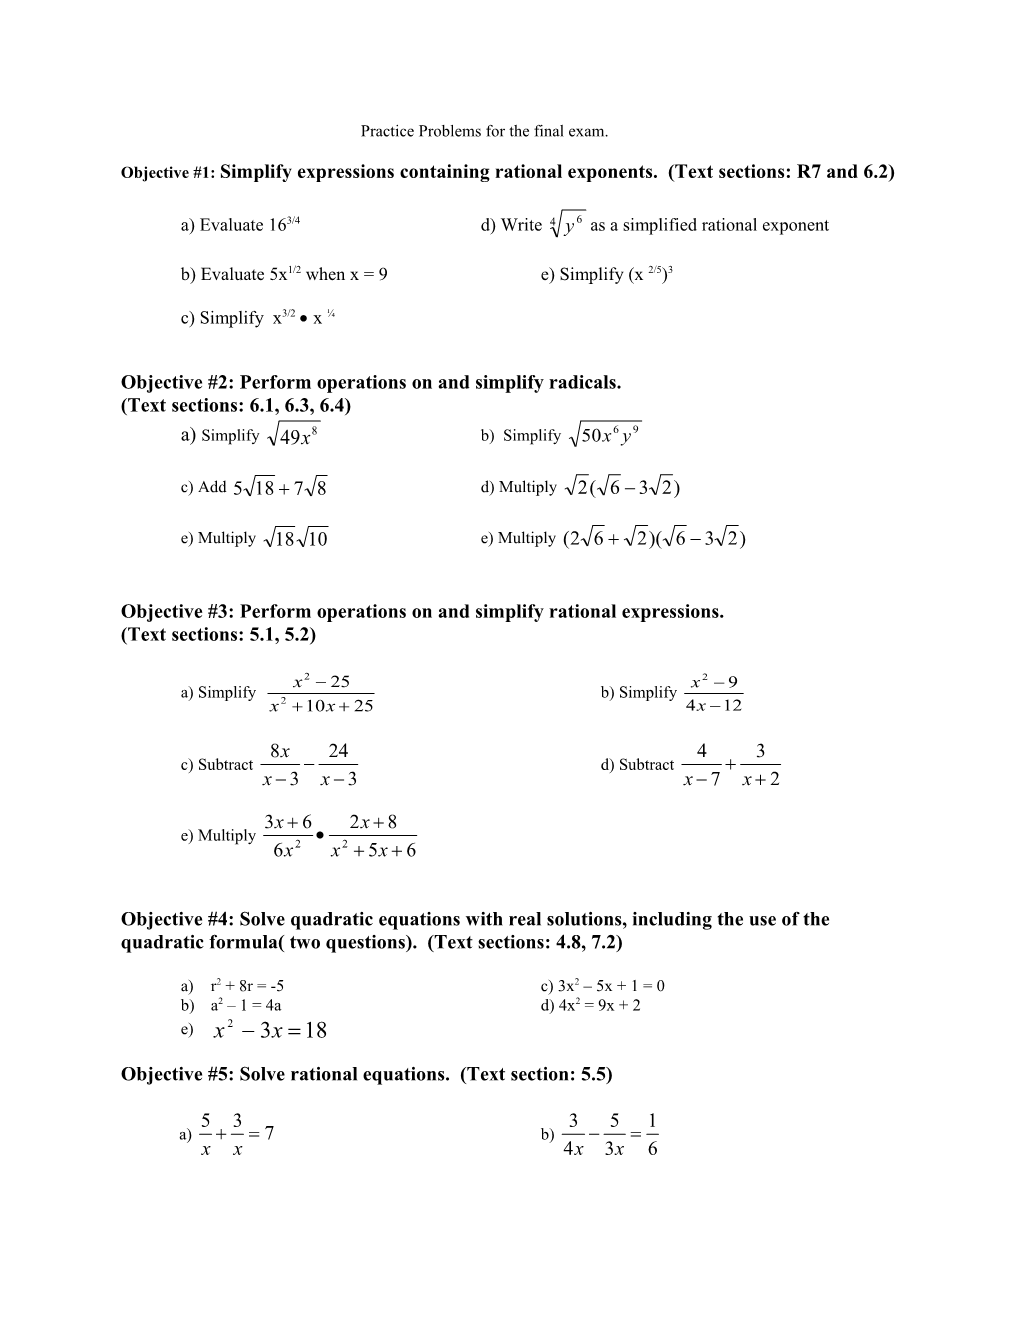 Practice Problems for the Final Exam